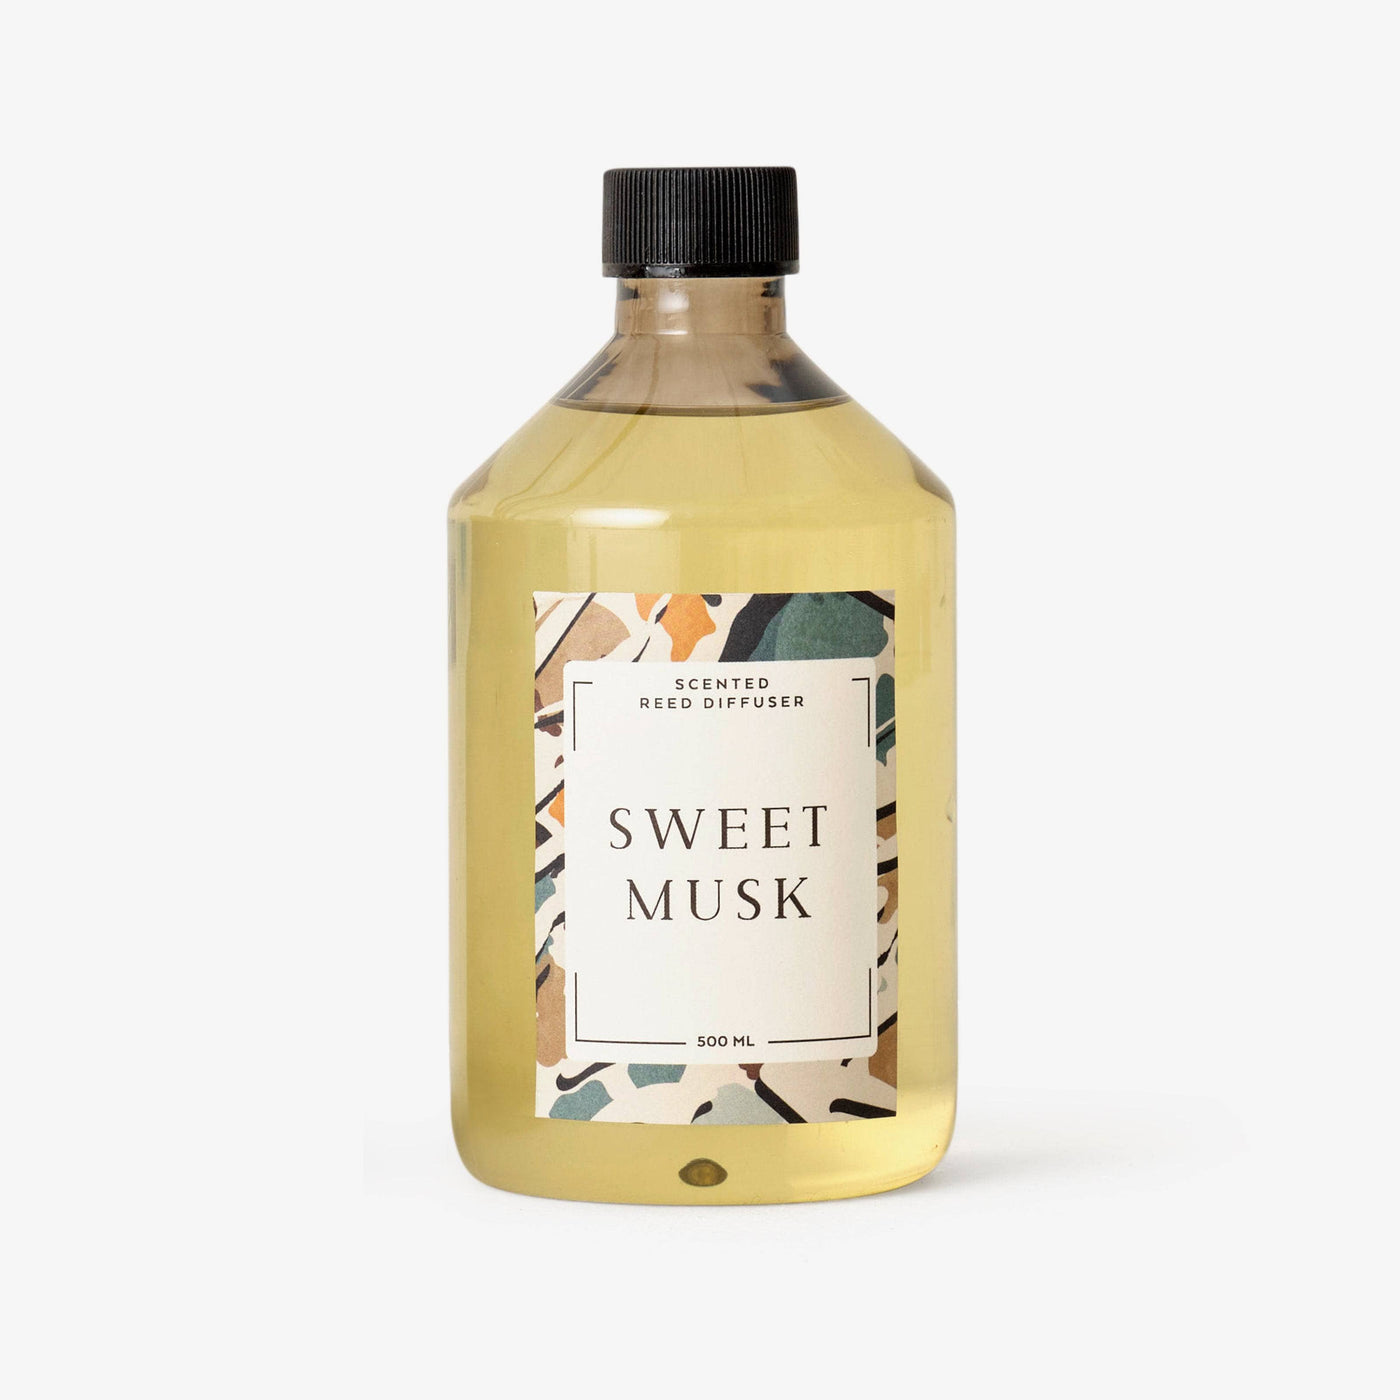 Sweet Musk Diffuser, Charcoal, 500 ml Diffusers sazy.com